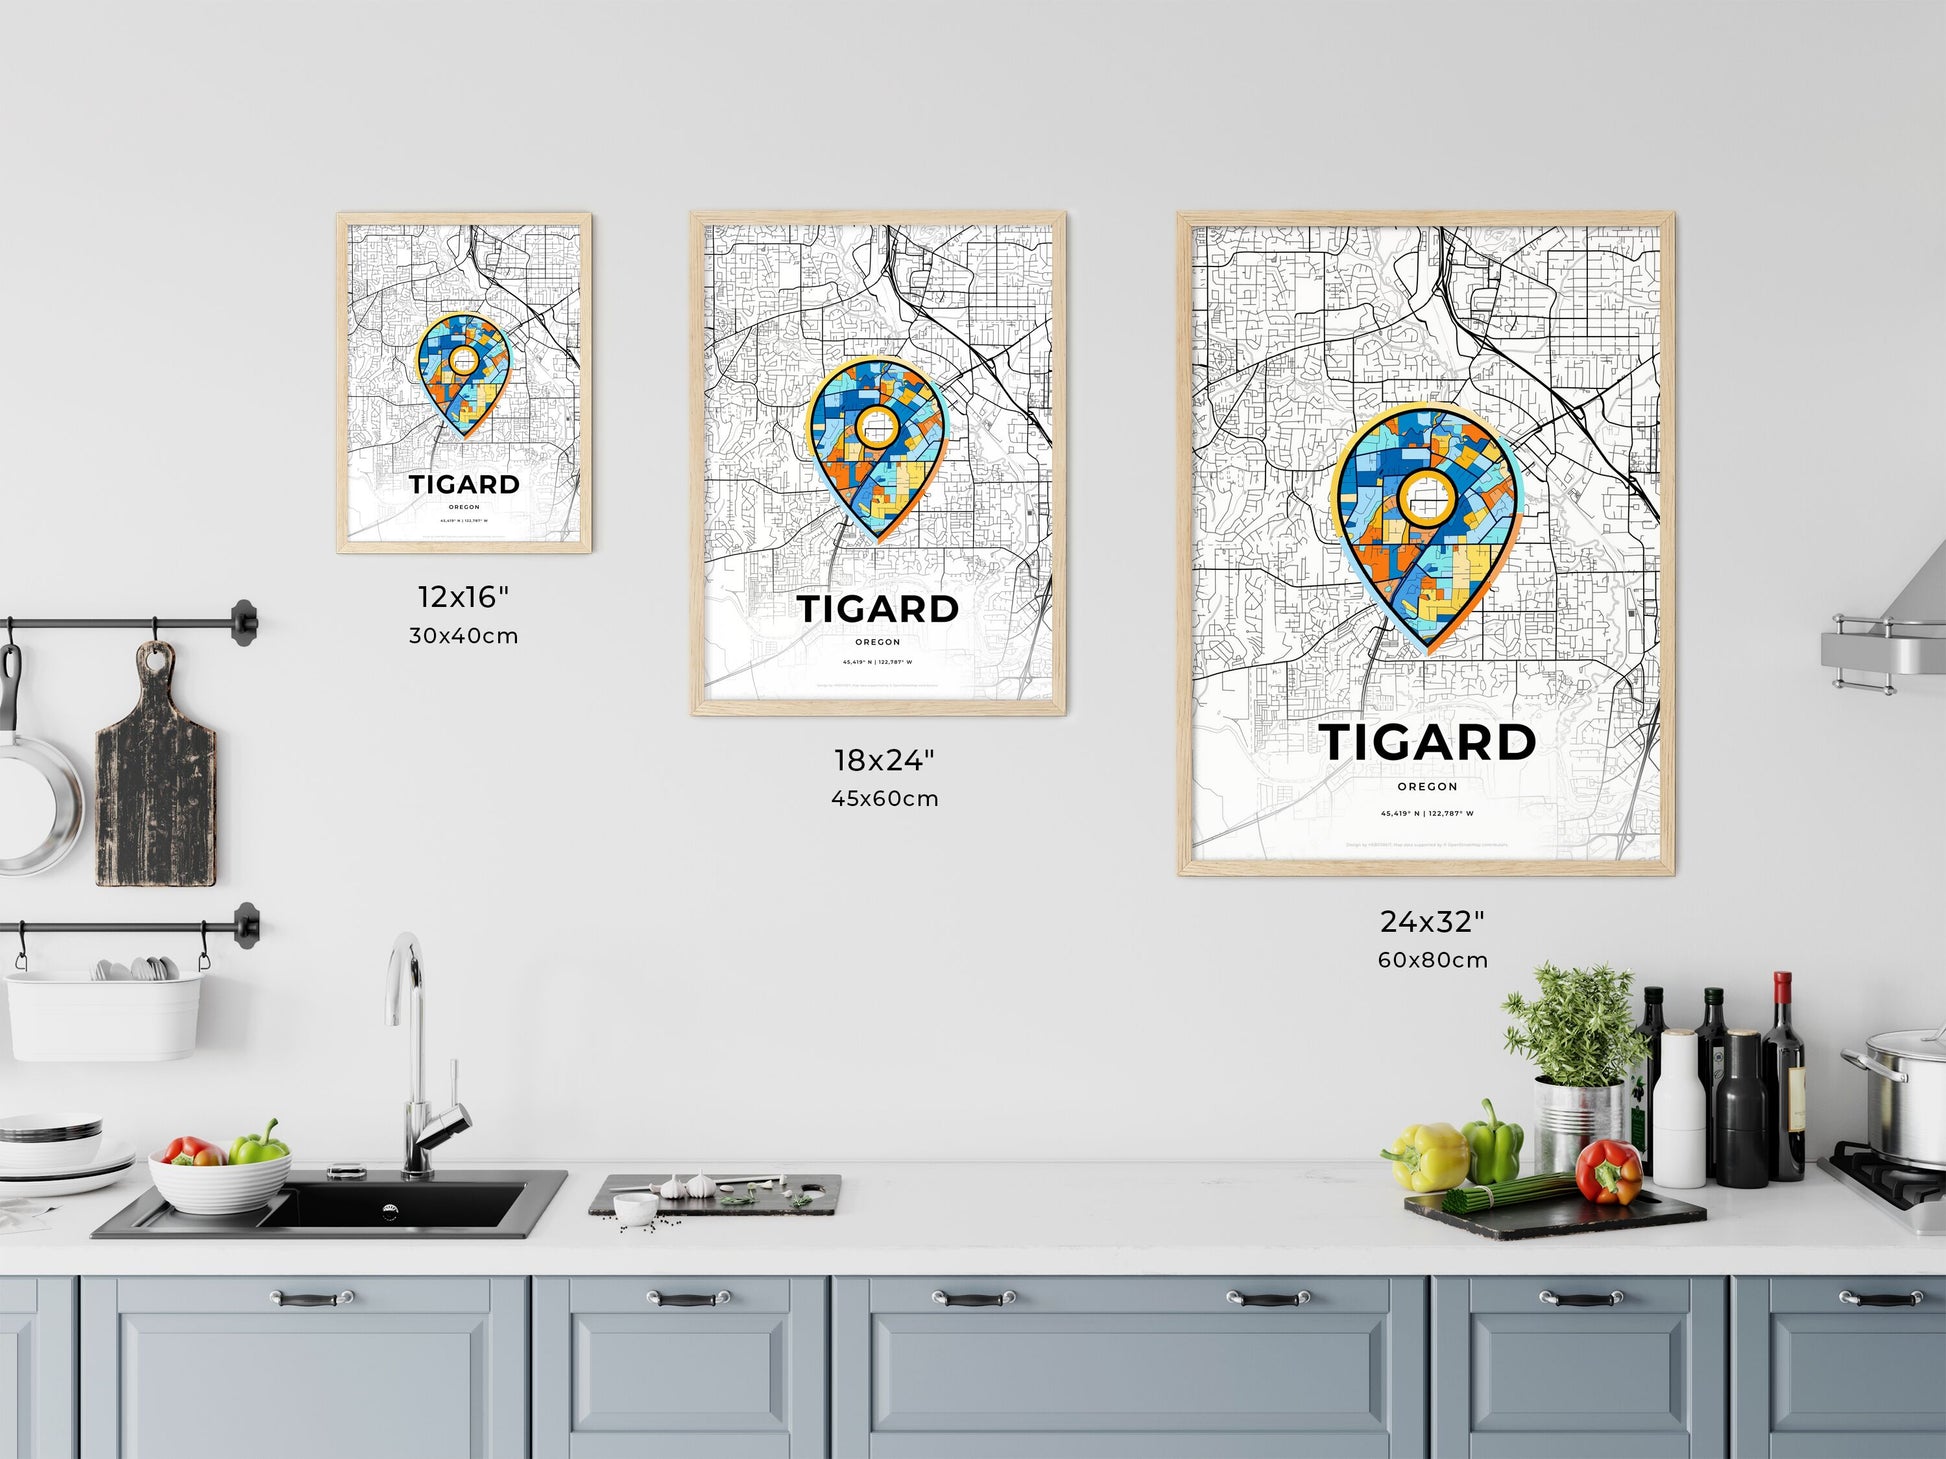 TIGARD OREGON minimal art map with a colorful icon.